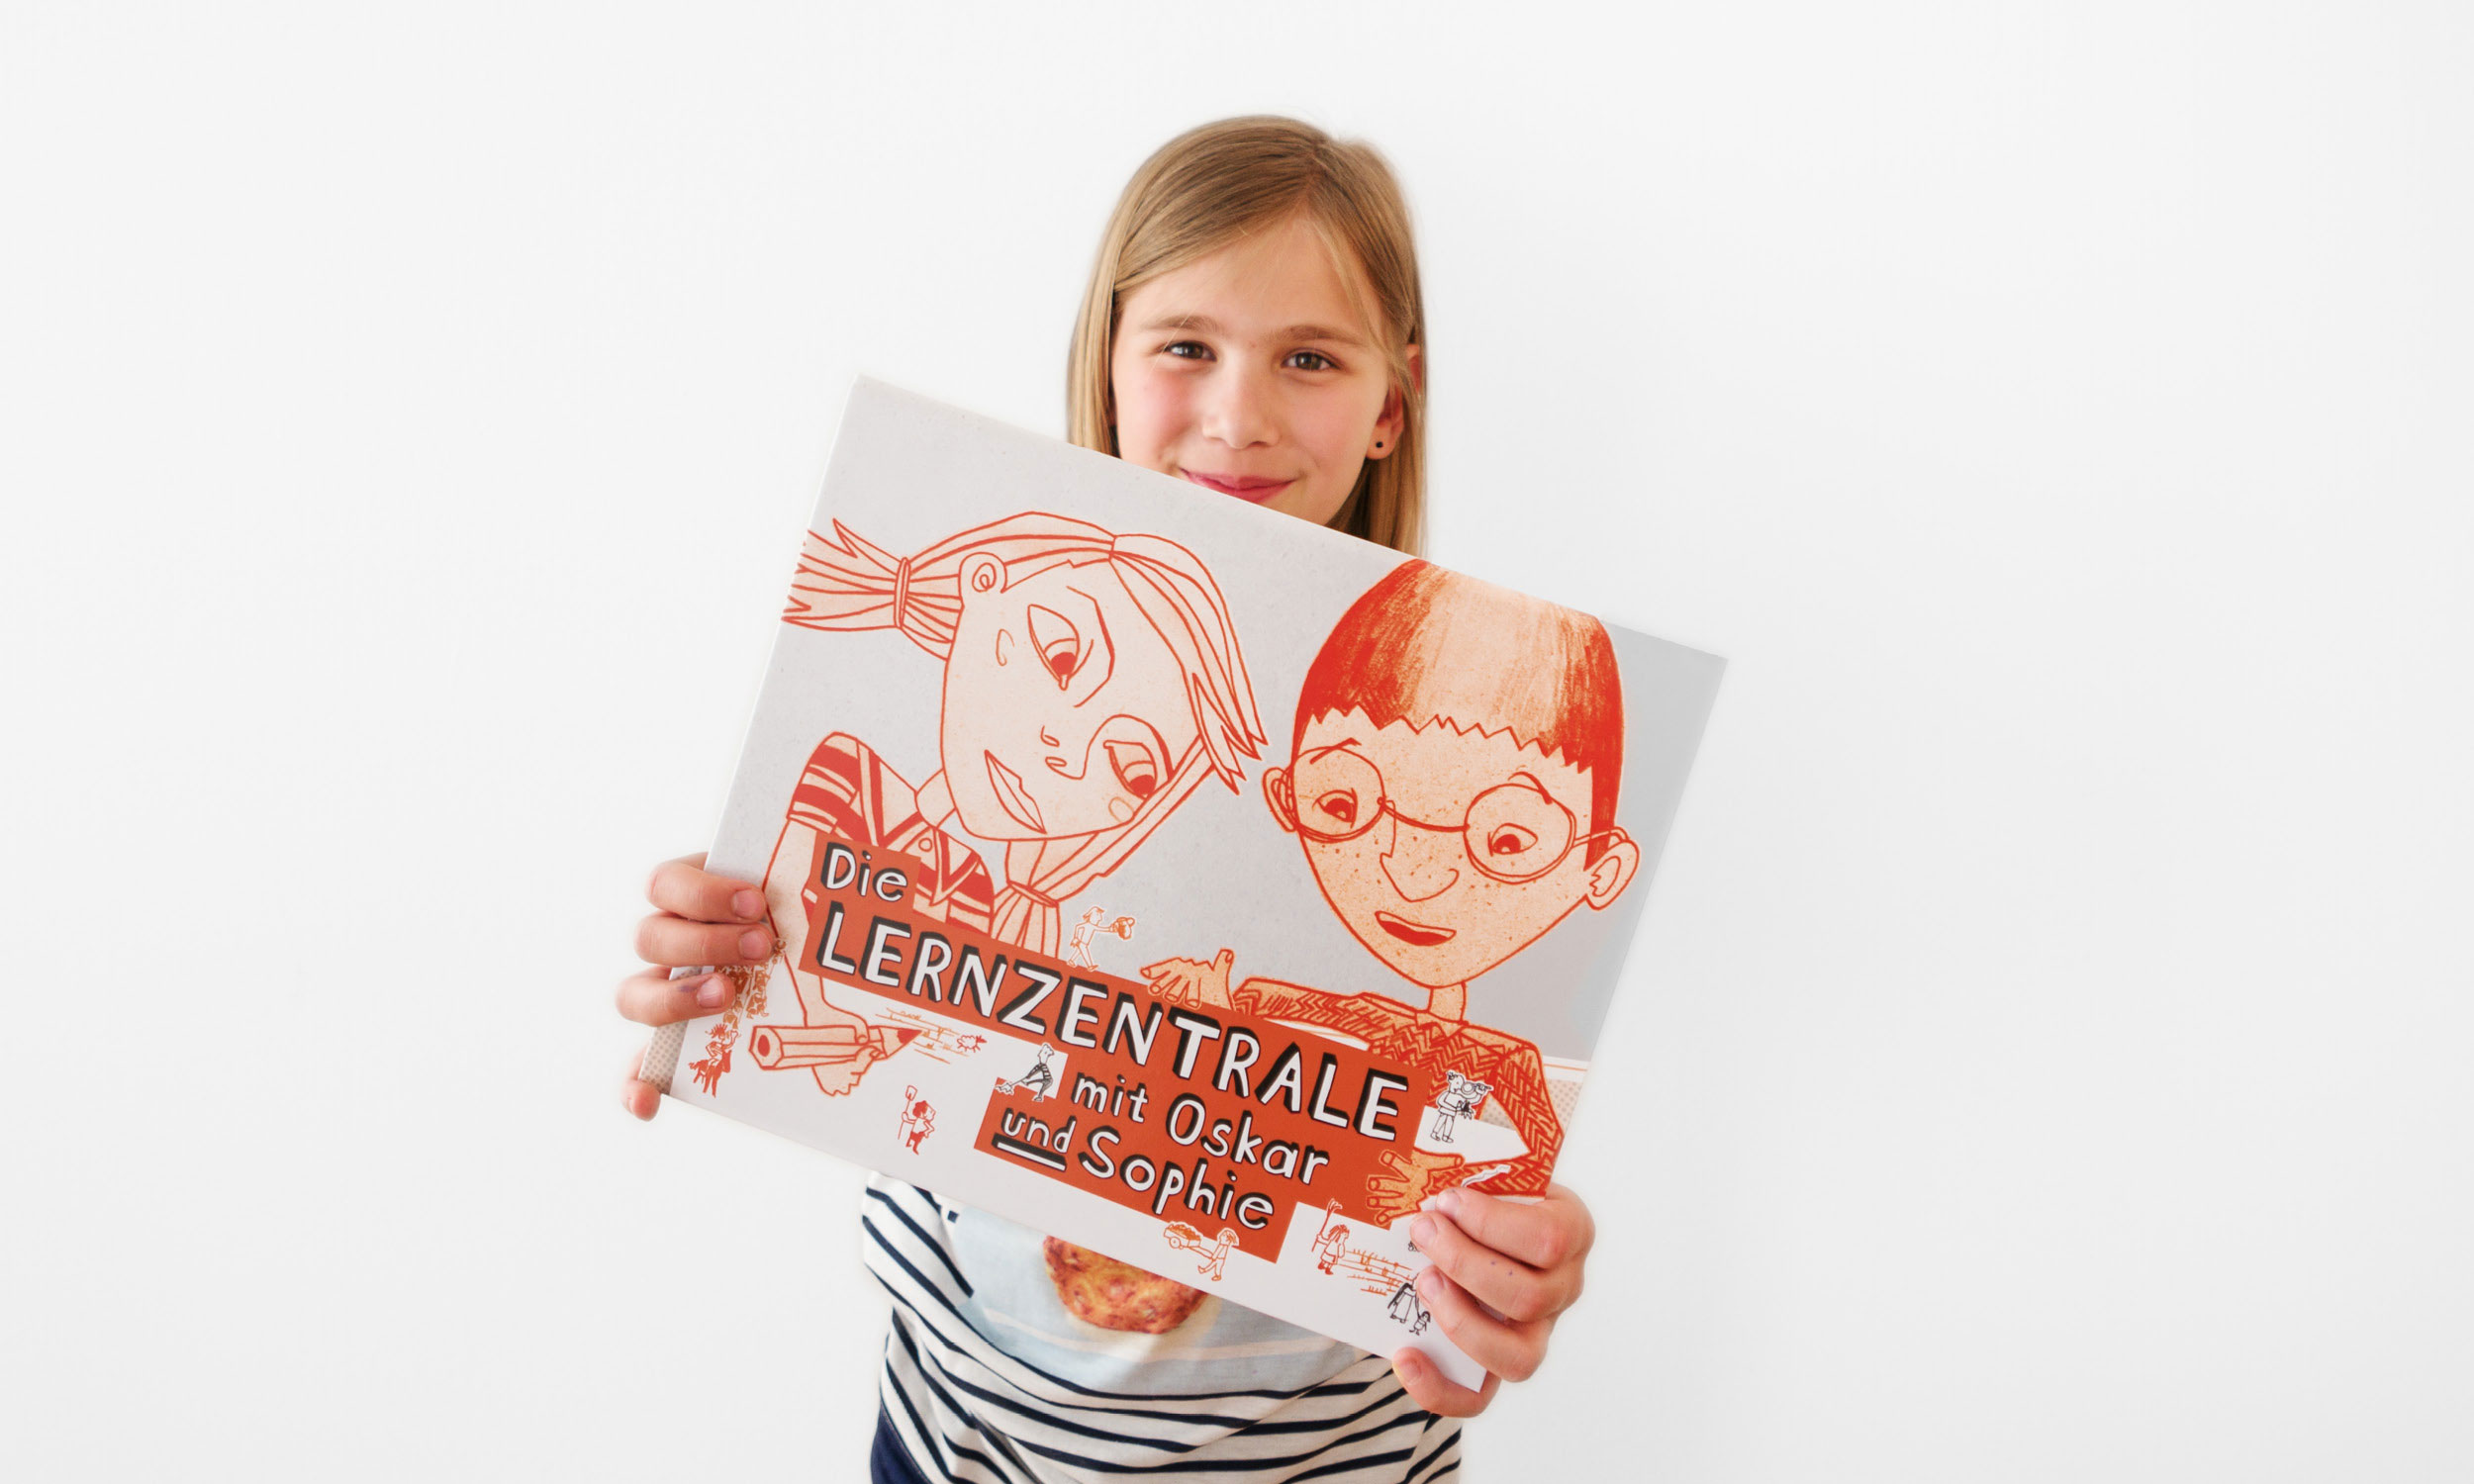 Photo of a smiling girl proudly showing the folder "The Learning Centre with Oskar and Sophie".